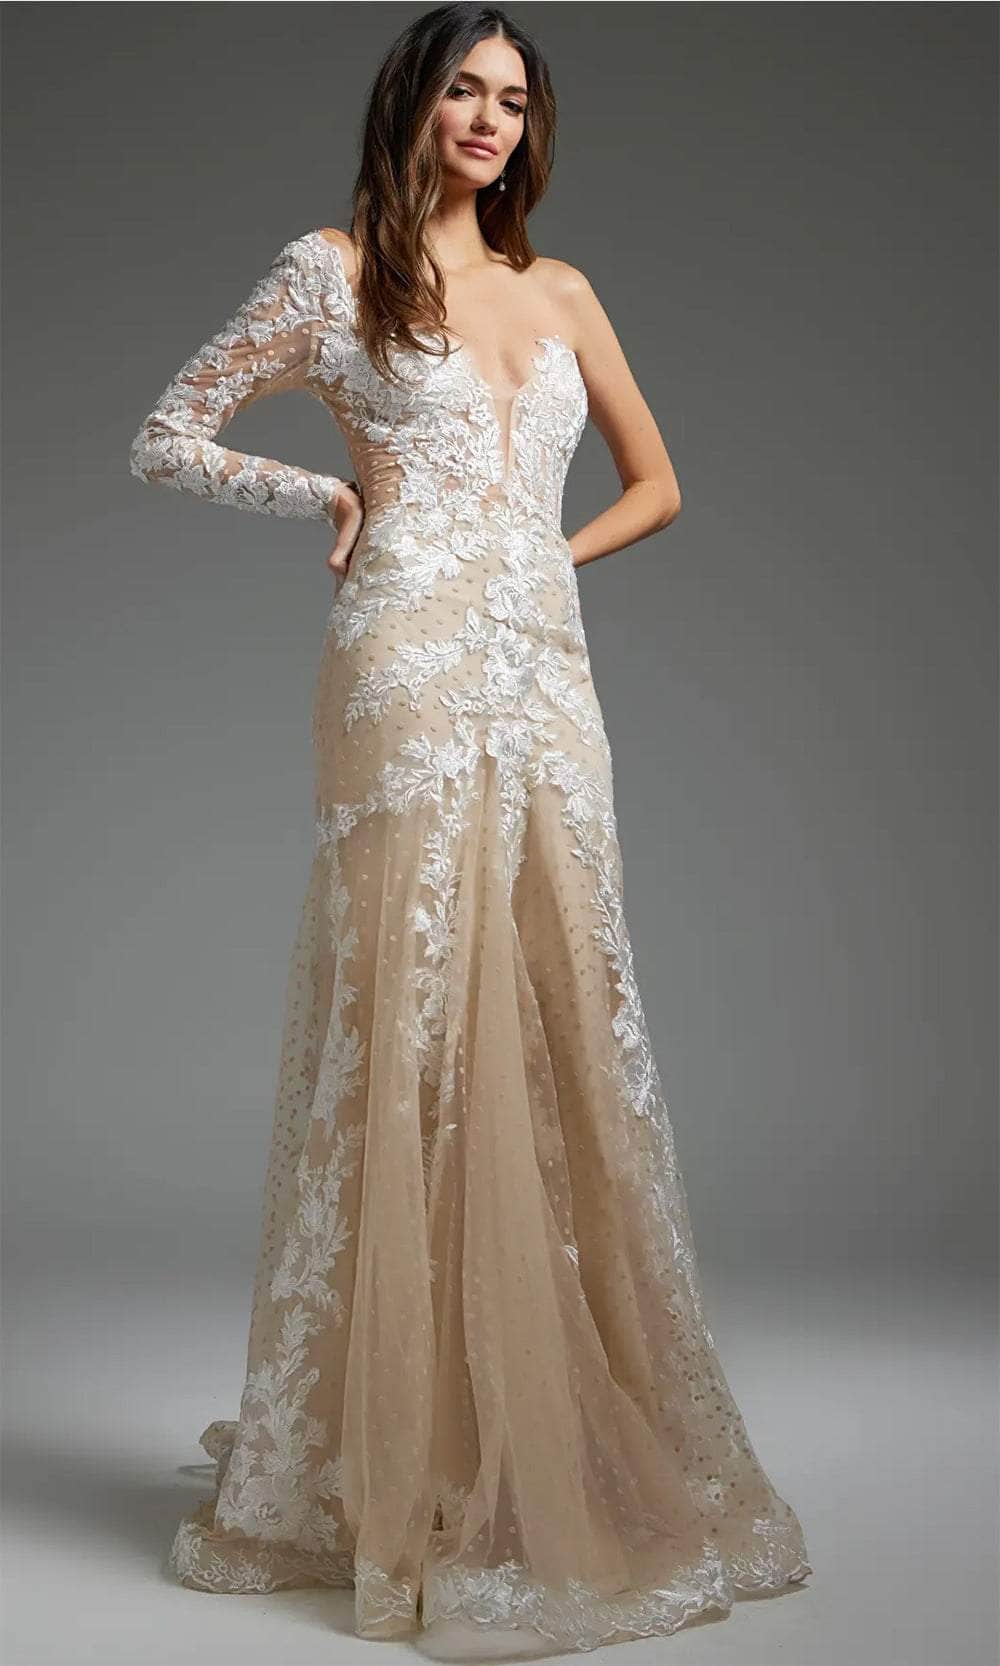 Jovani JB06650 - Beaded Lace Bridal Gown Bridal Dresses 00  Off-White/Nude